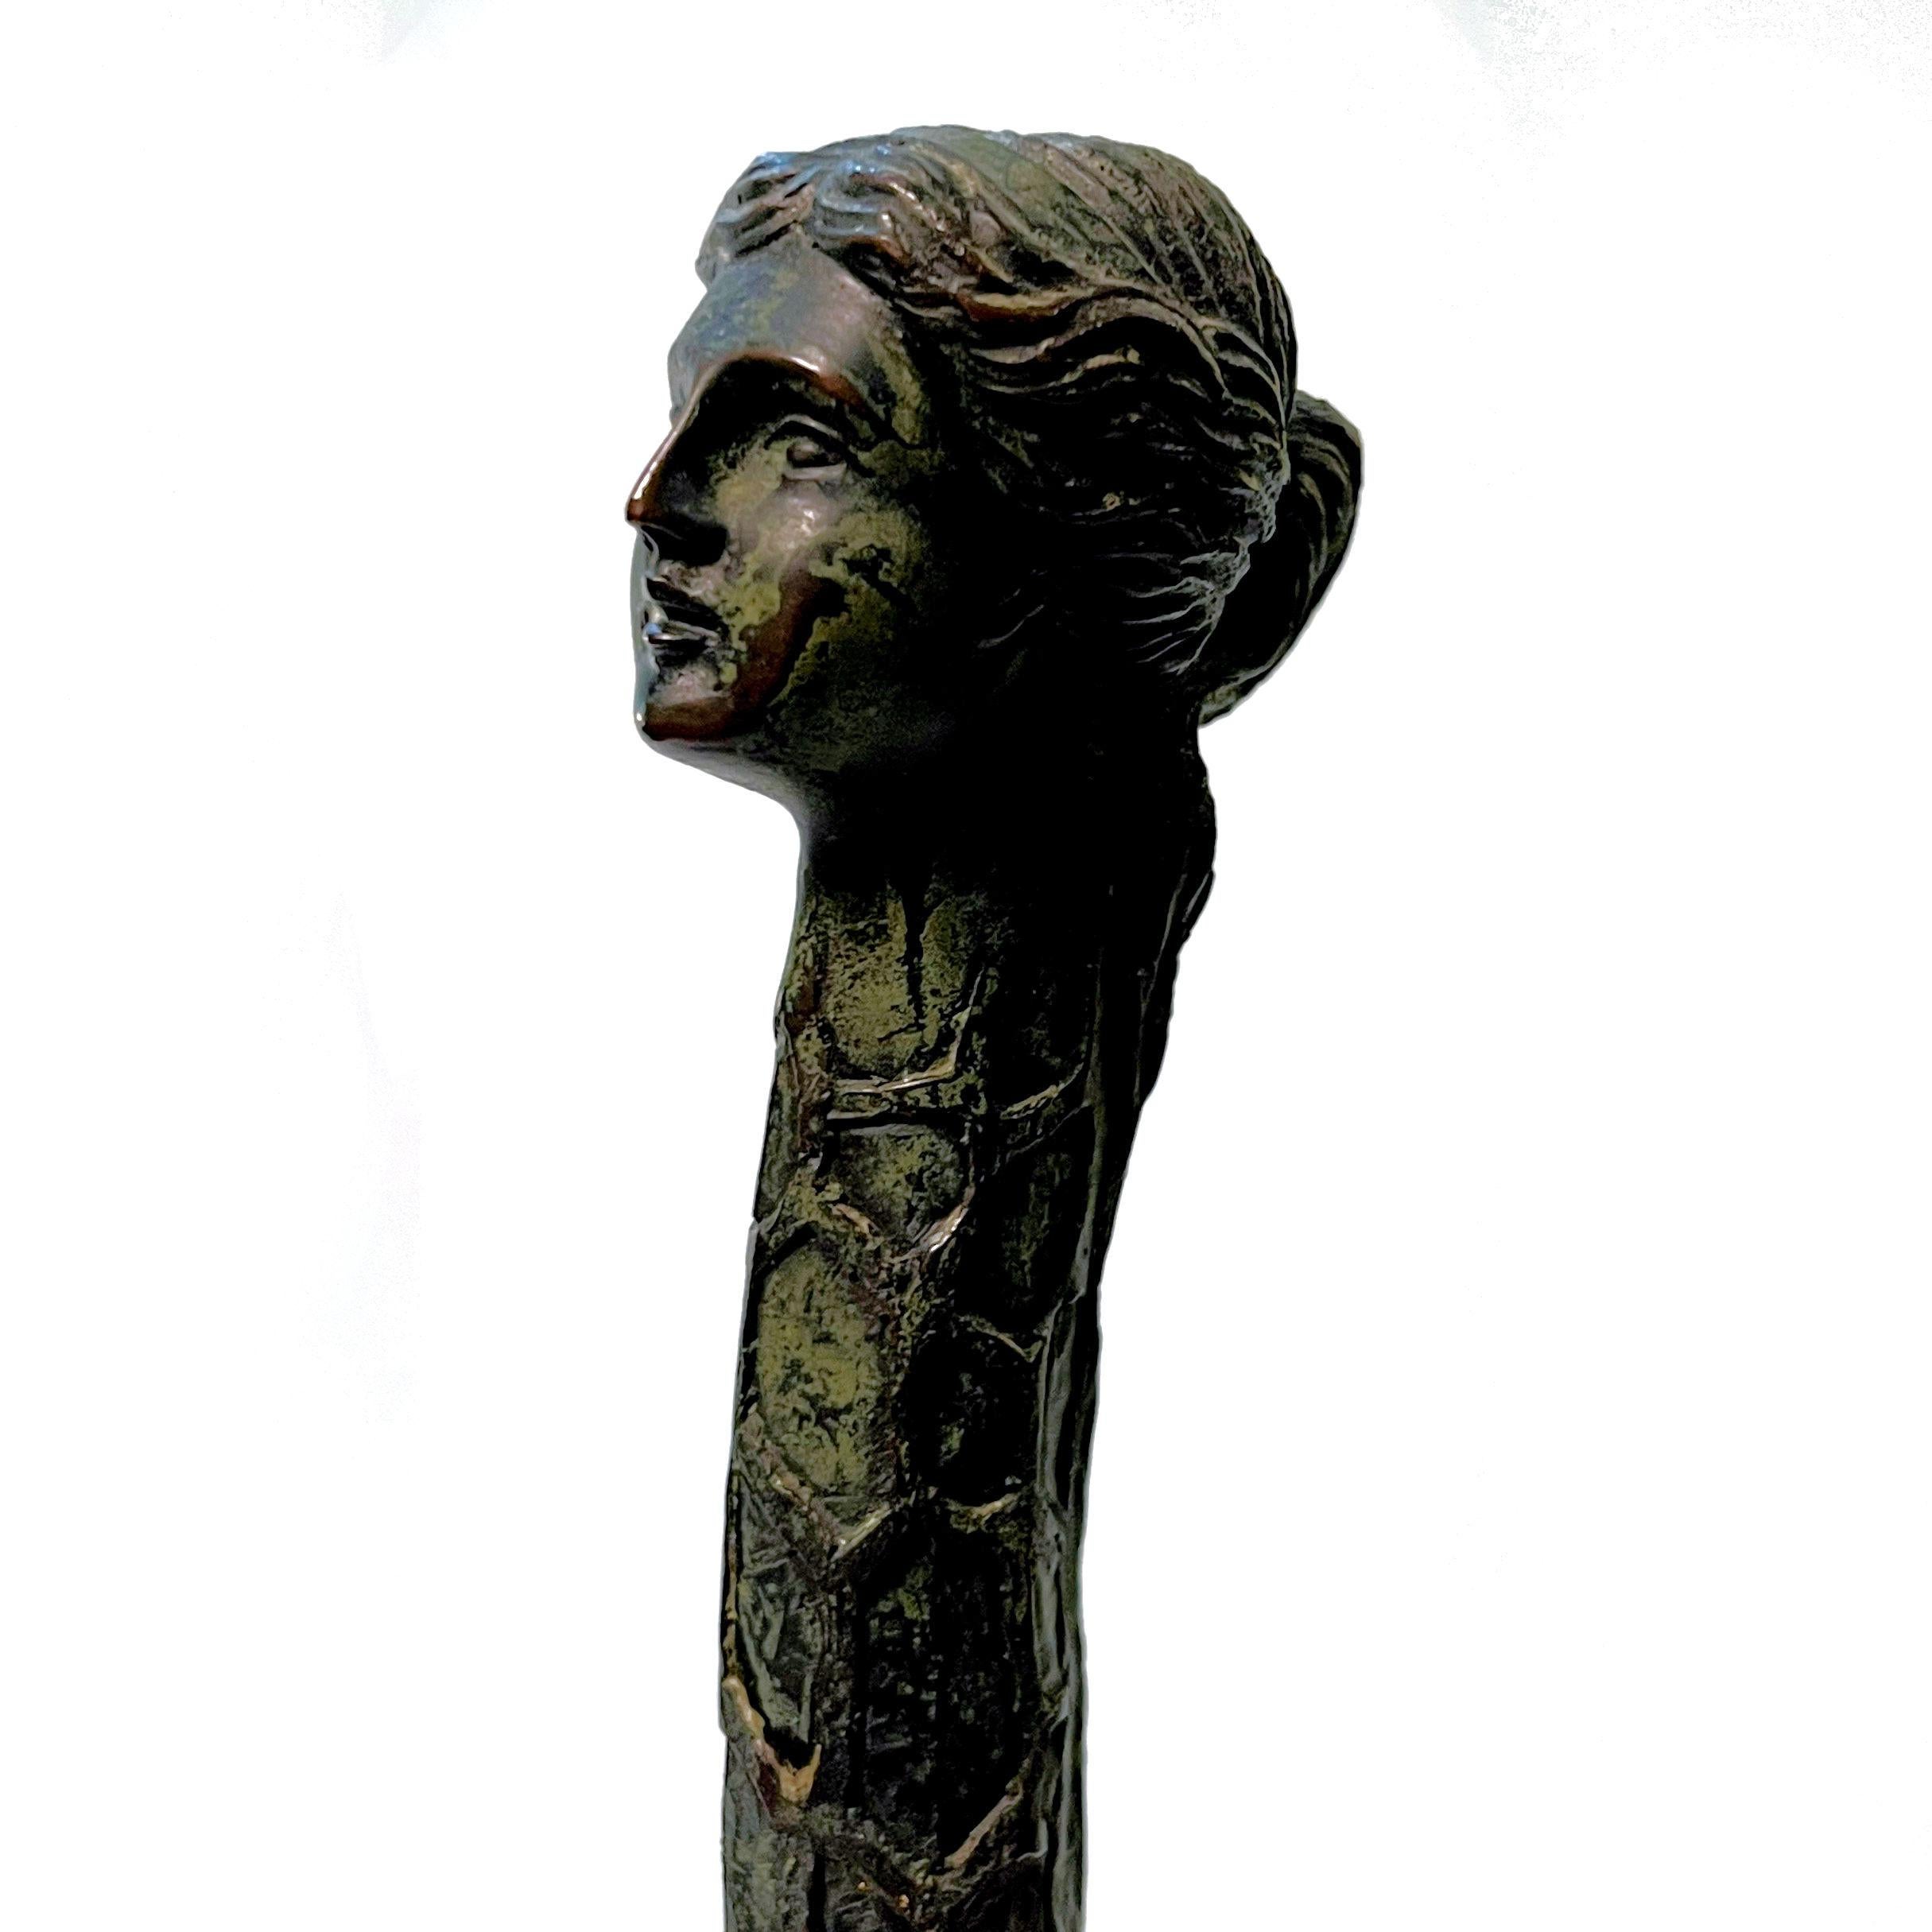 Our bronze by Salvador Dali (1904-1989), entitled Venus à la Giraffe, is number 128 from an edition of 1,500 cast by Venturi Arte in Bologna, Italy, in 1973. Inscribed marks 